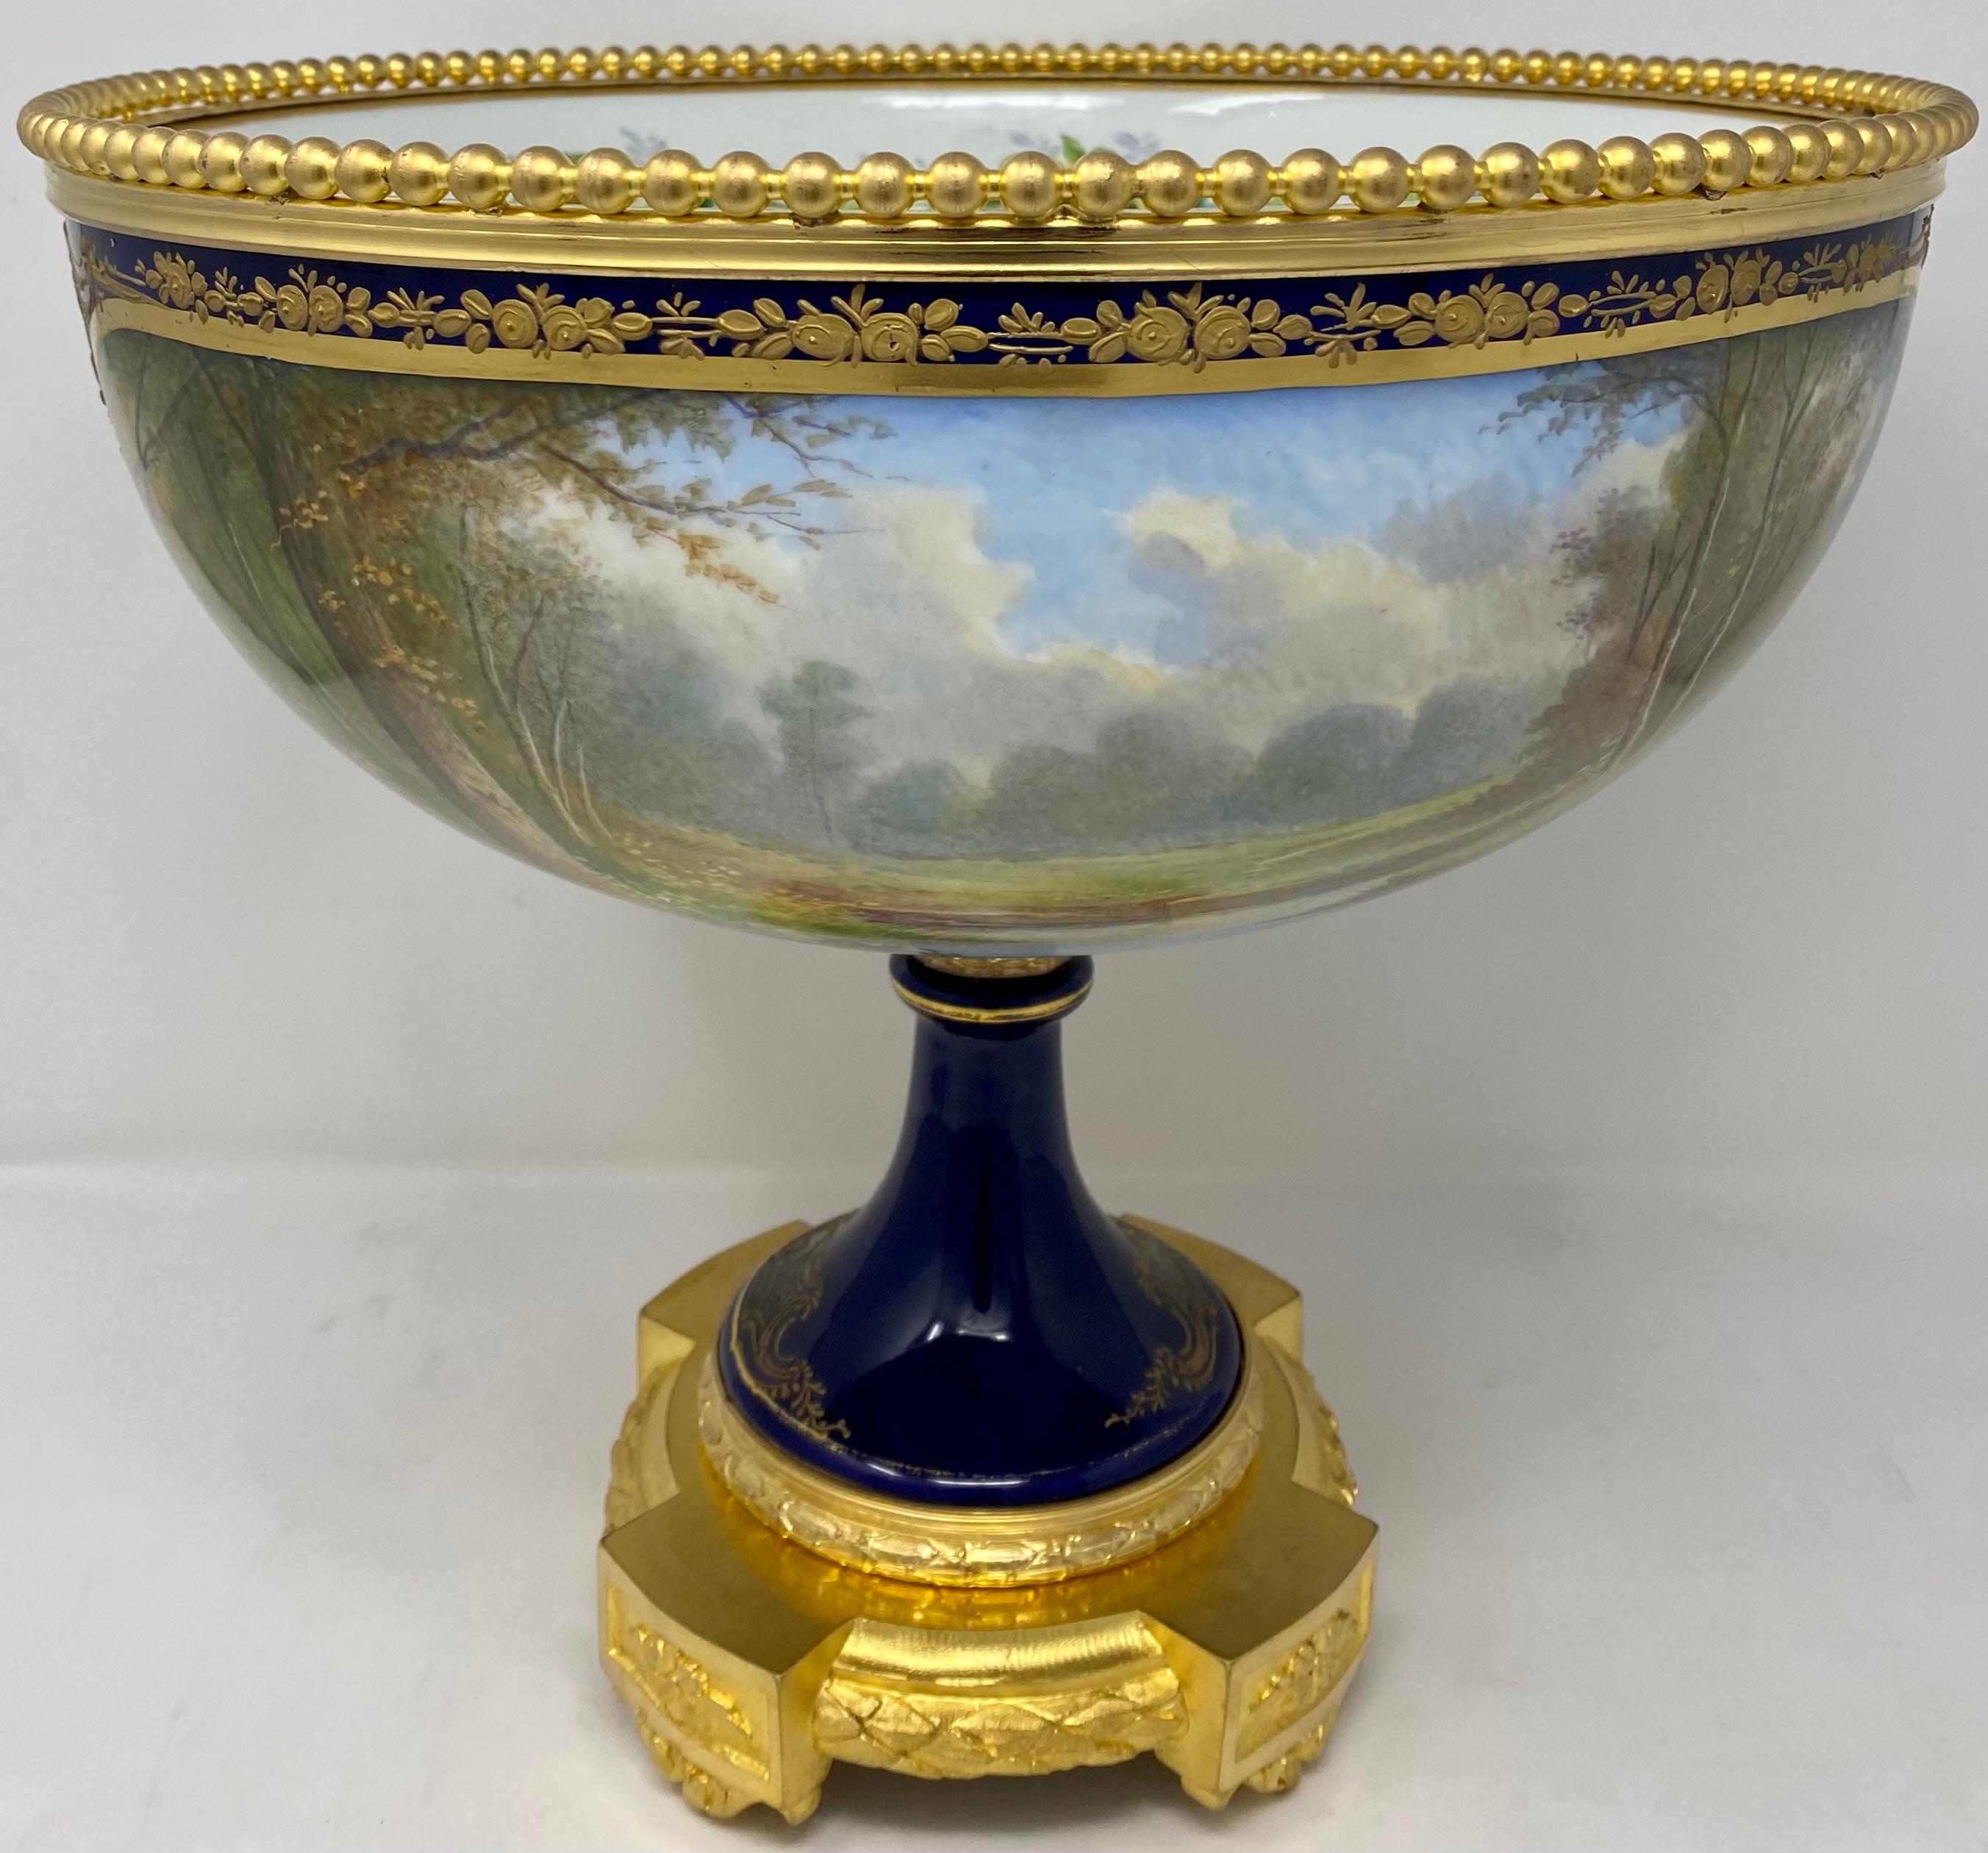 Antique French gold bronze mounted cobalt blue Sevres porcelain centerpiece, Circa 1890.
This centerpiece has different images on each side as shown in the pictures.
 